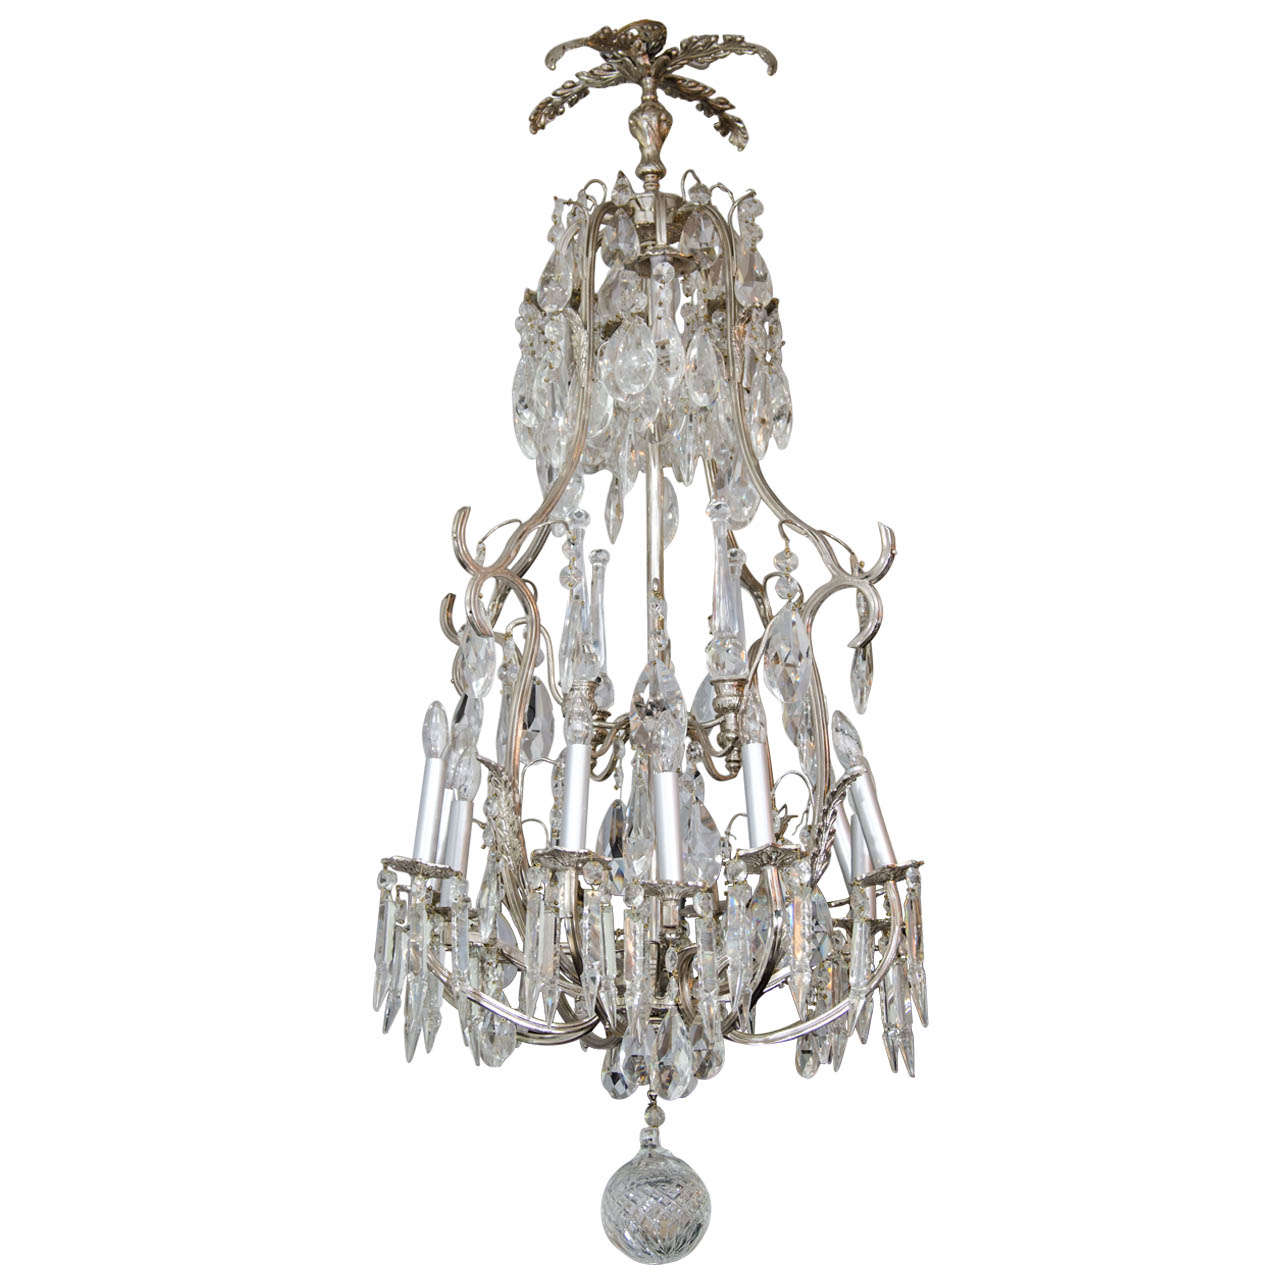 20th Century French Crystal and Nickel-Plated Fixture